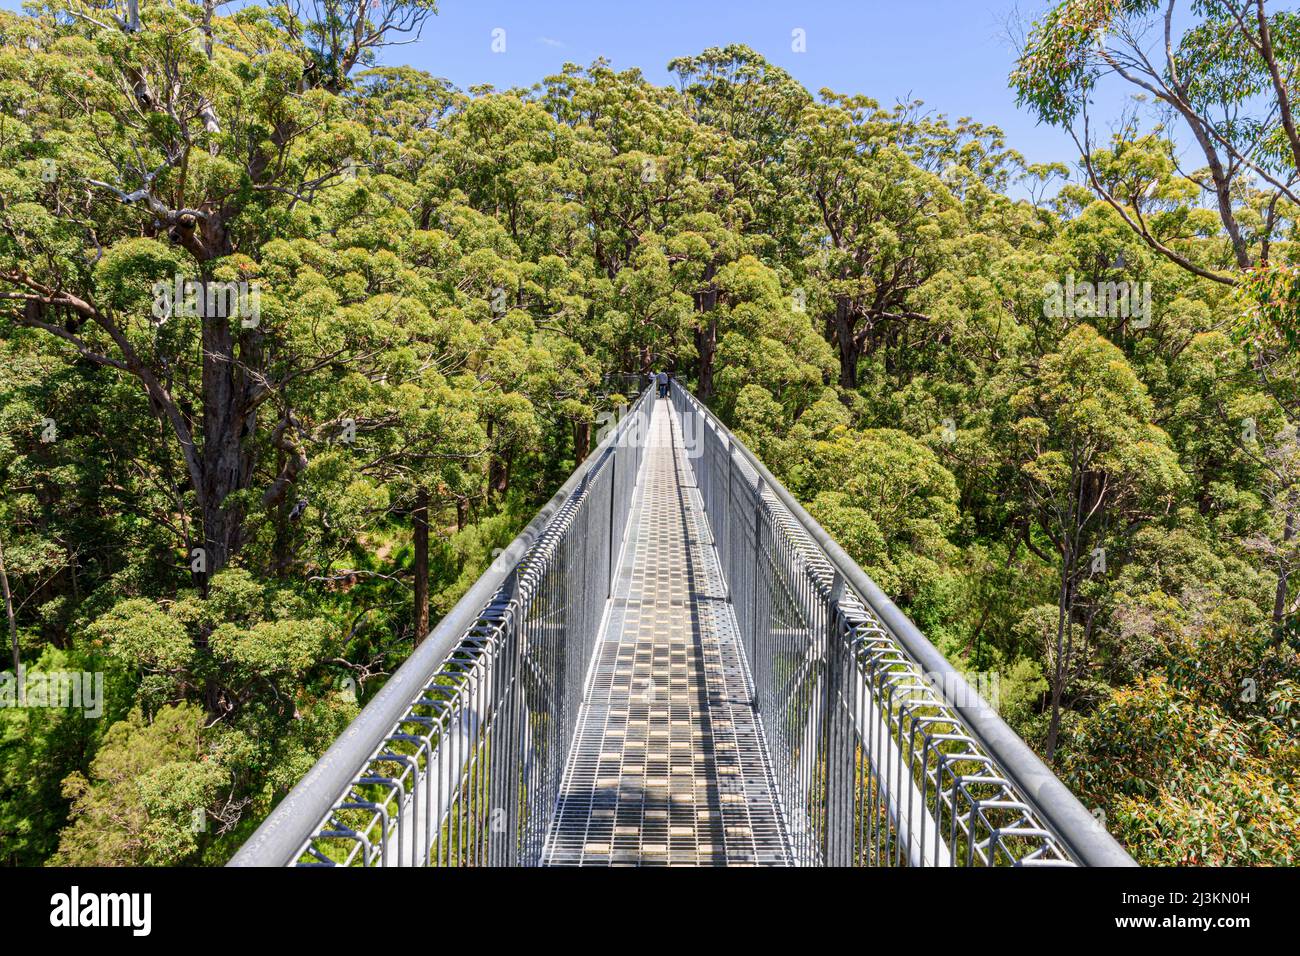 The Valley of the Giants Tree Top Walk walkway through the Red Tingle forest canopy, Walpole Nornalup National Park, Western Australia, Australia Stock Photo